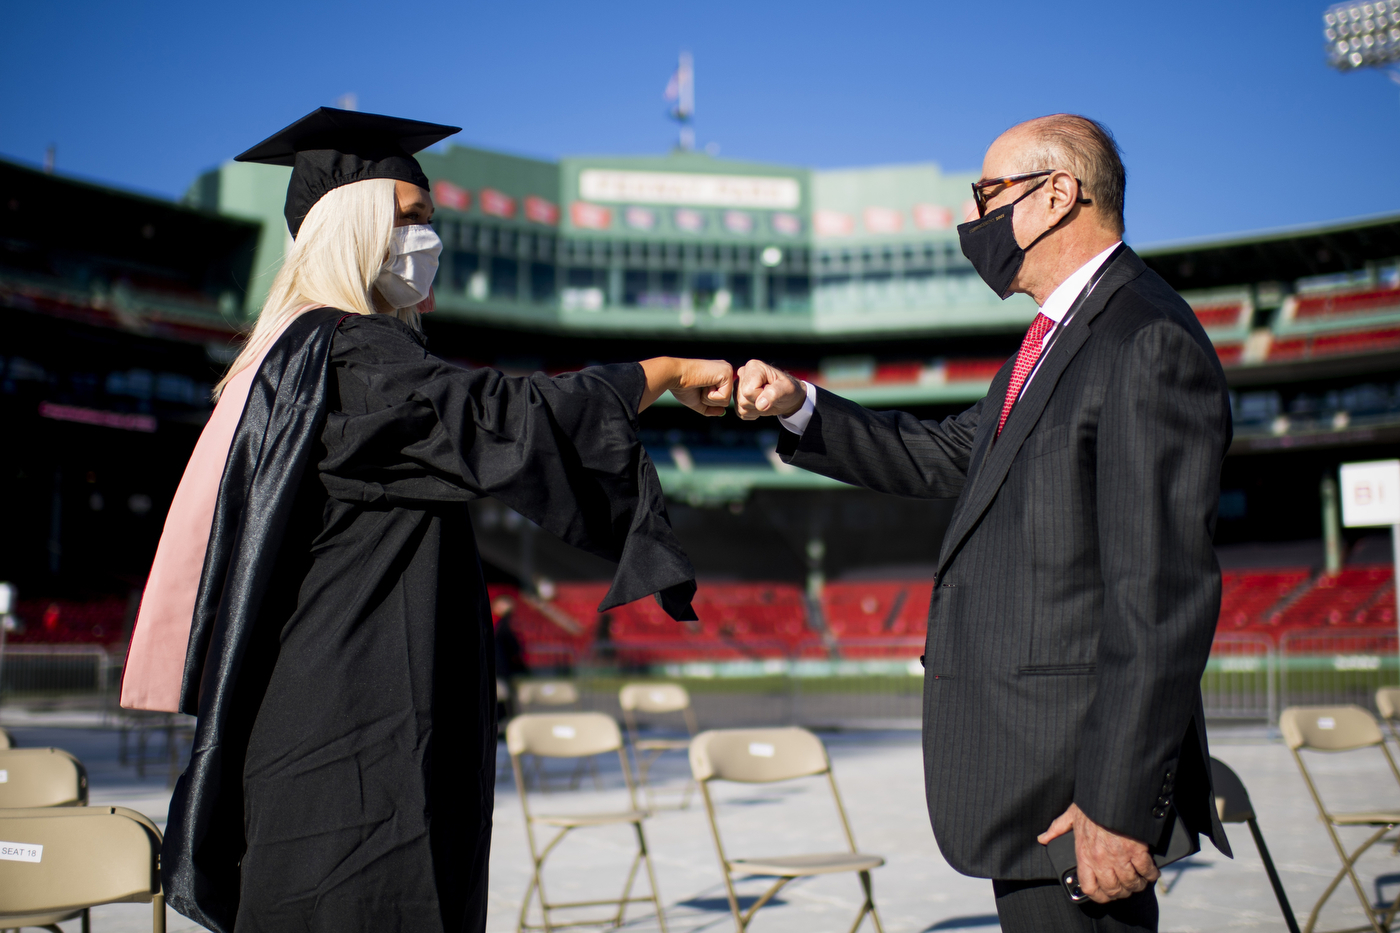 Joseph E. Aoun (right), president of Northeastern, would note “the power of human connection” in his speech to the graduate students at Fenway Park.